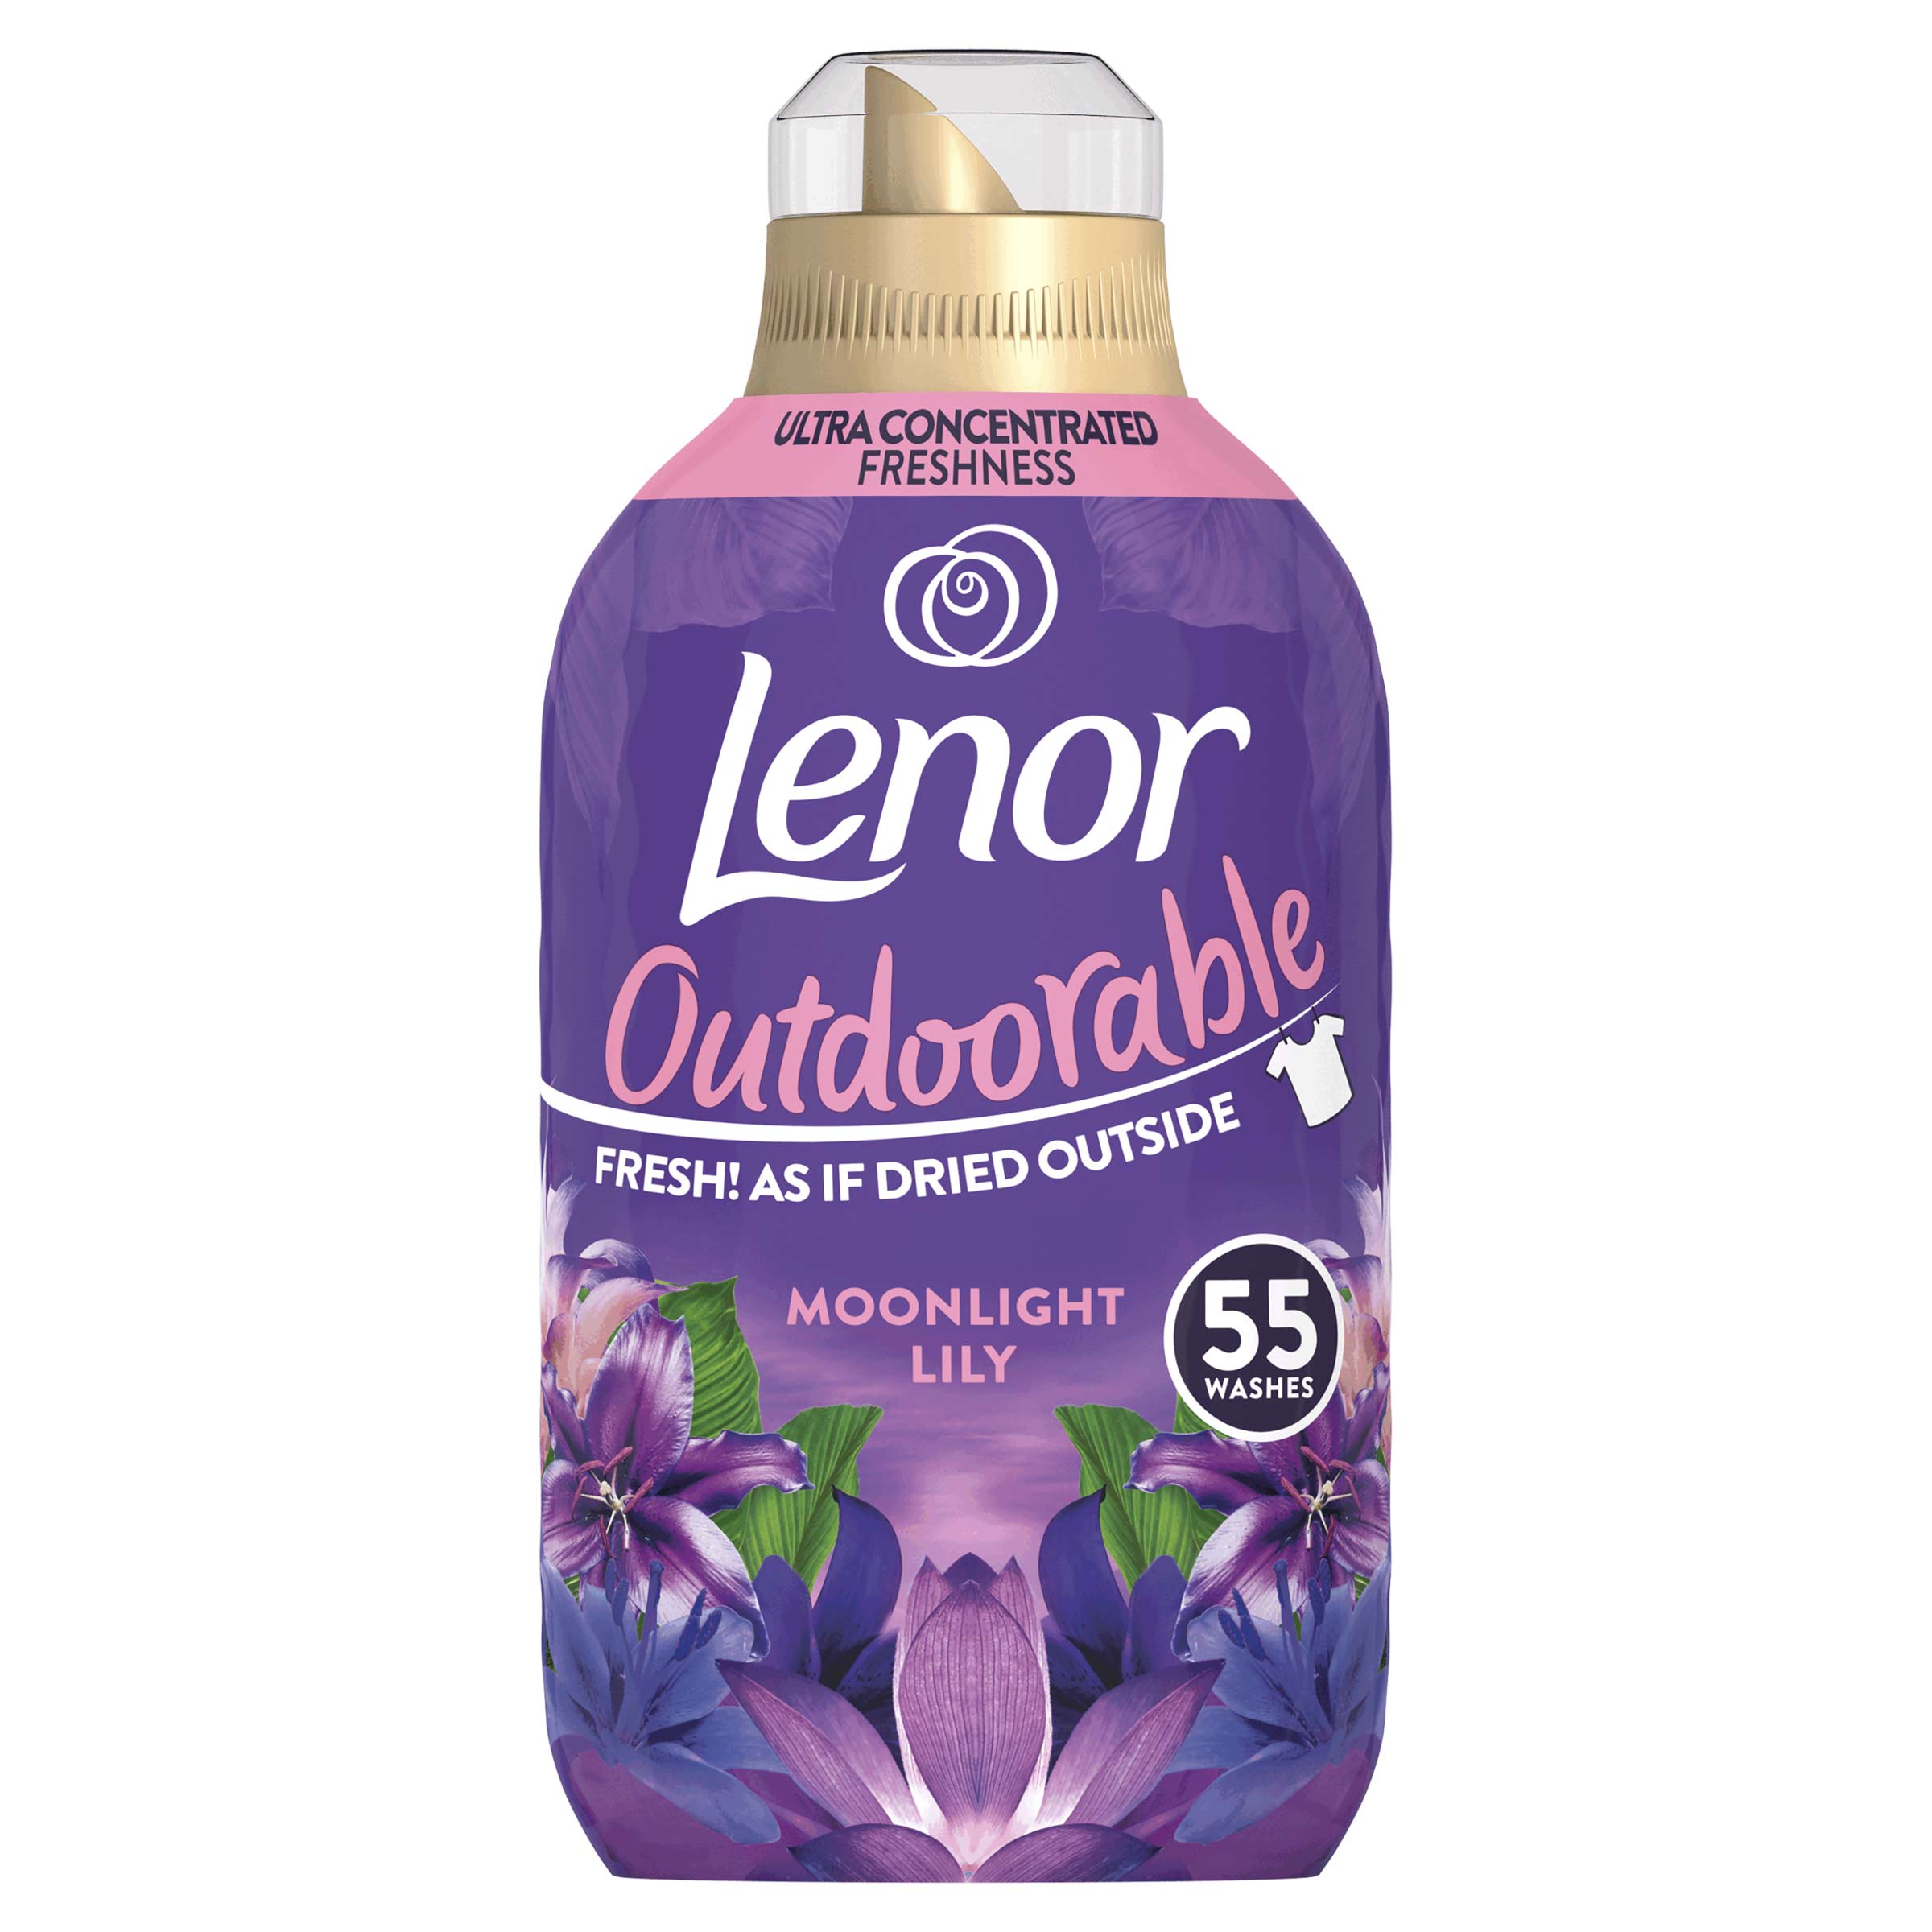 Lenor Outdoorable Midnight Lily Fabric Conditioner 55 Washes Case of 8 x 770ml Image 2